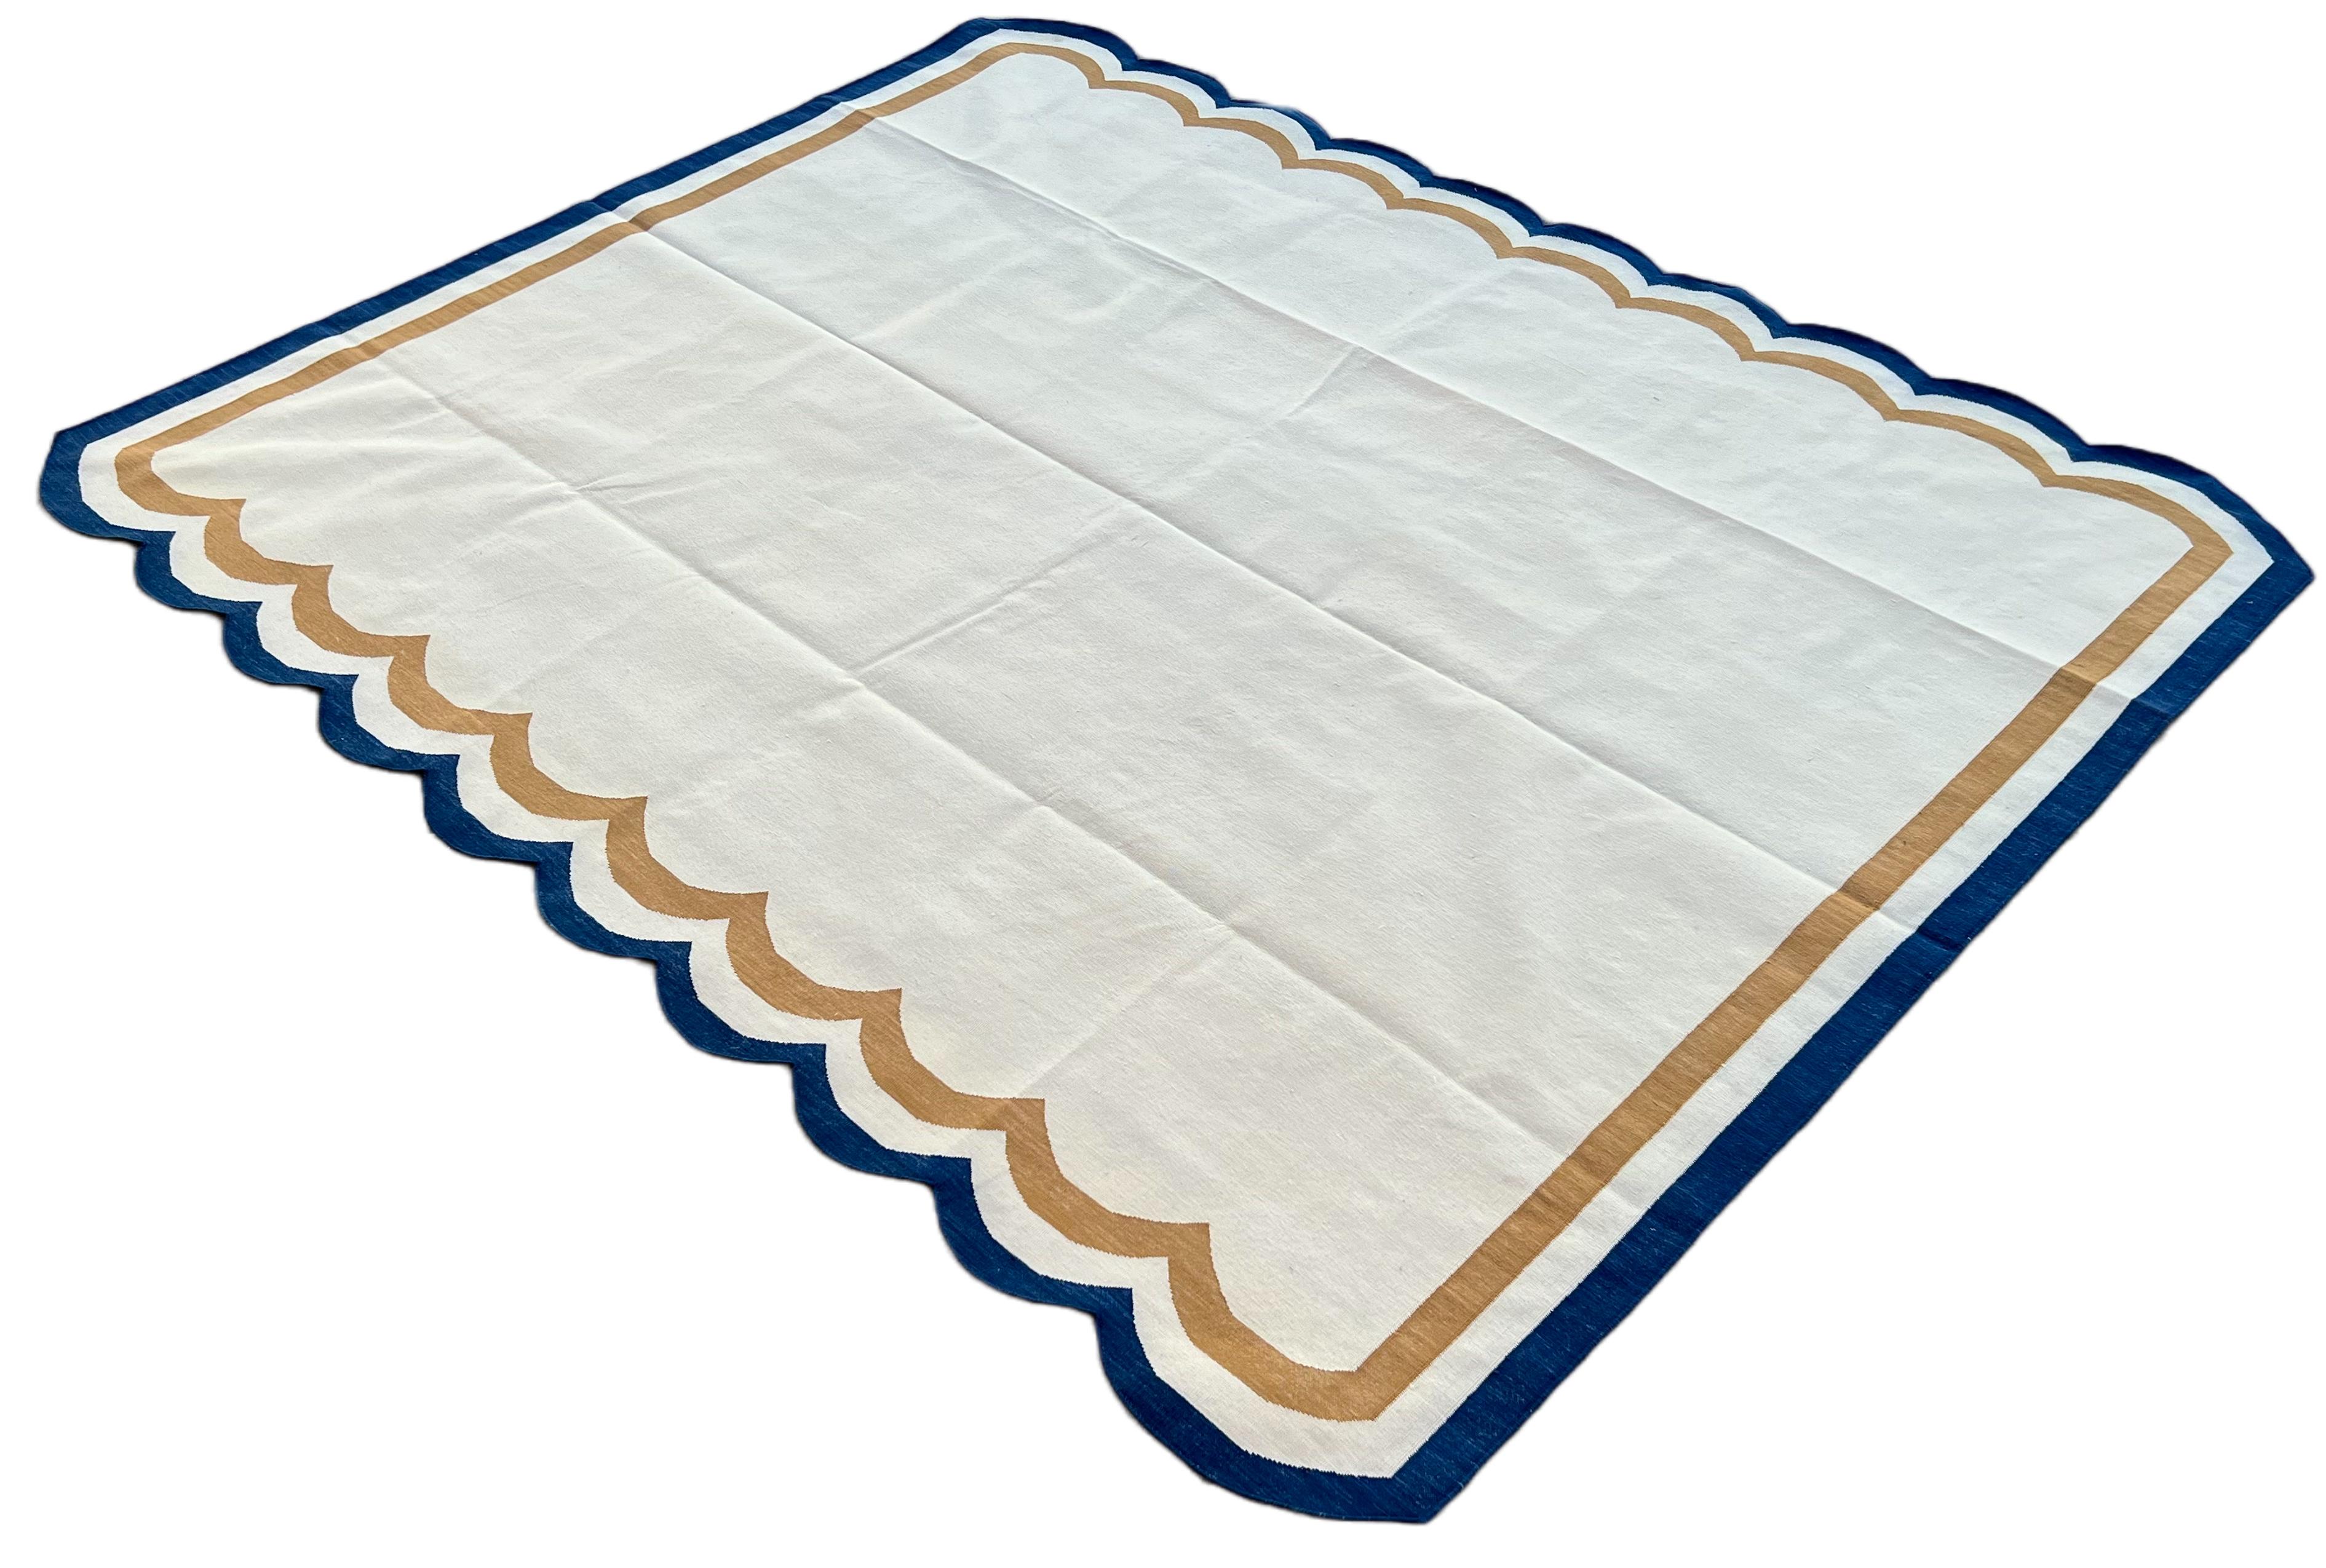 Cotton Vegetable Dyed Cream, Tan and Navy Blue 2 Sided Indian Scalloped Rug - 8'x10'
These special flat-weave dhurries are hand-woven with 15 ply 100% cotton yarn. Due to the special manufacturing techniques used to create our rugs, the size and